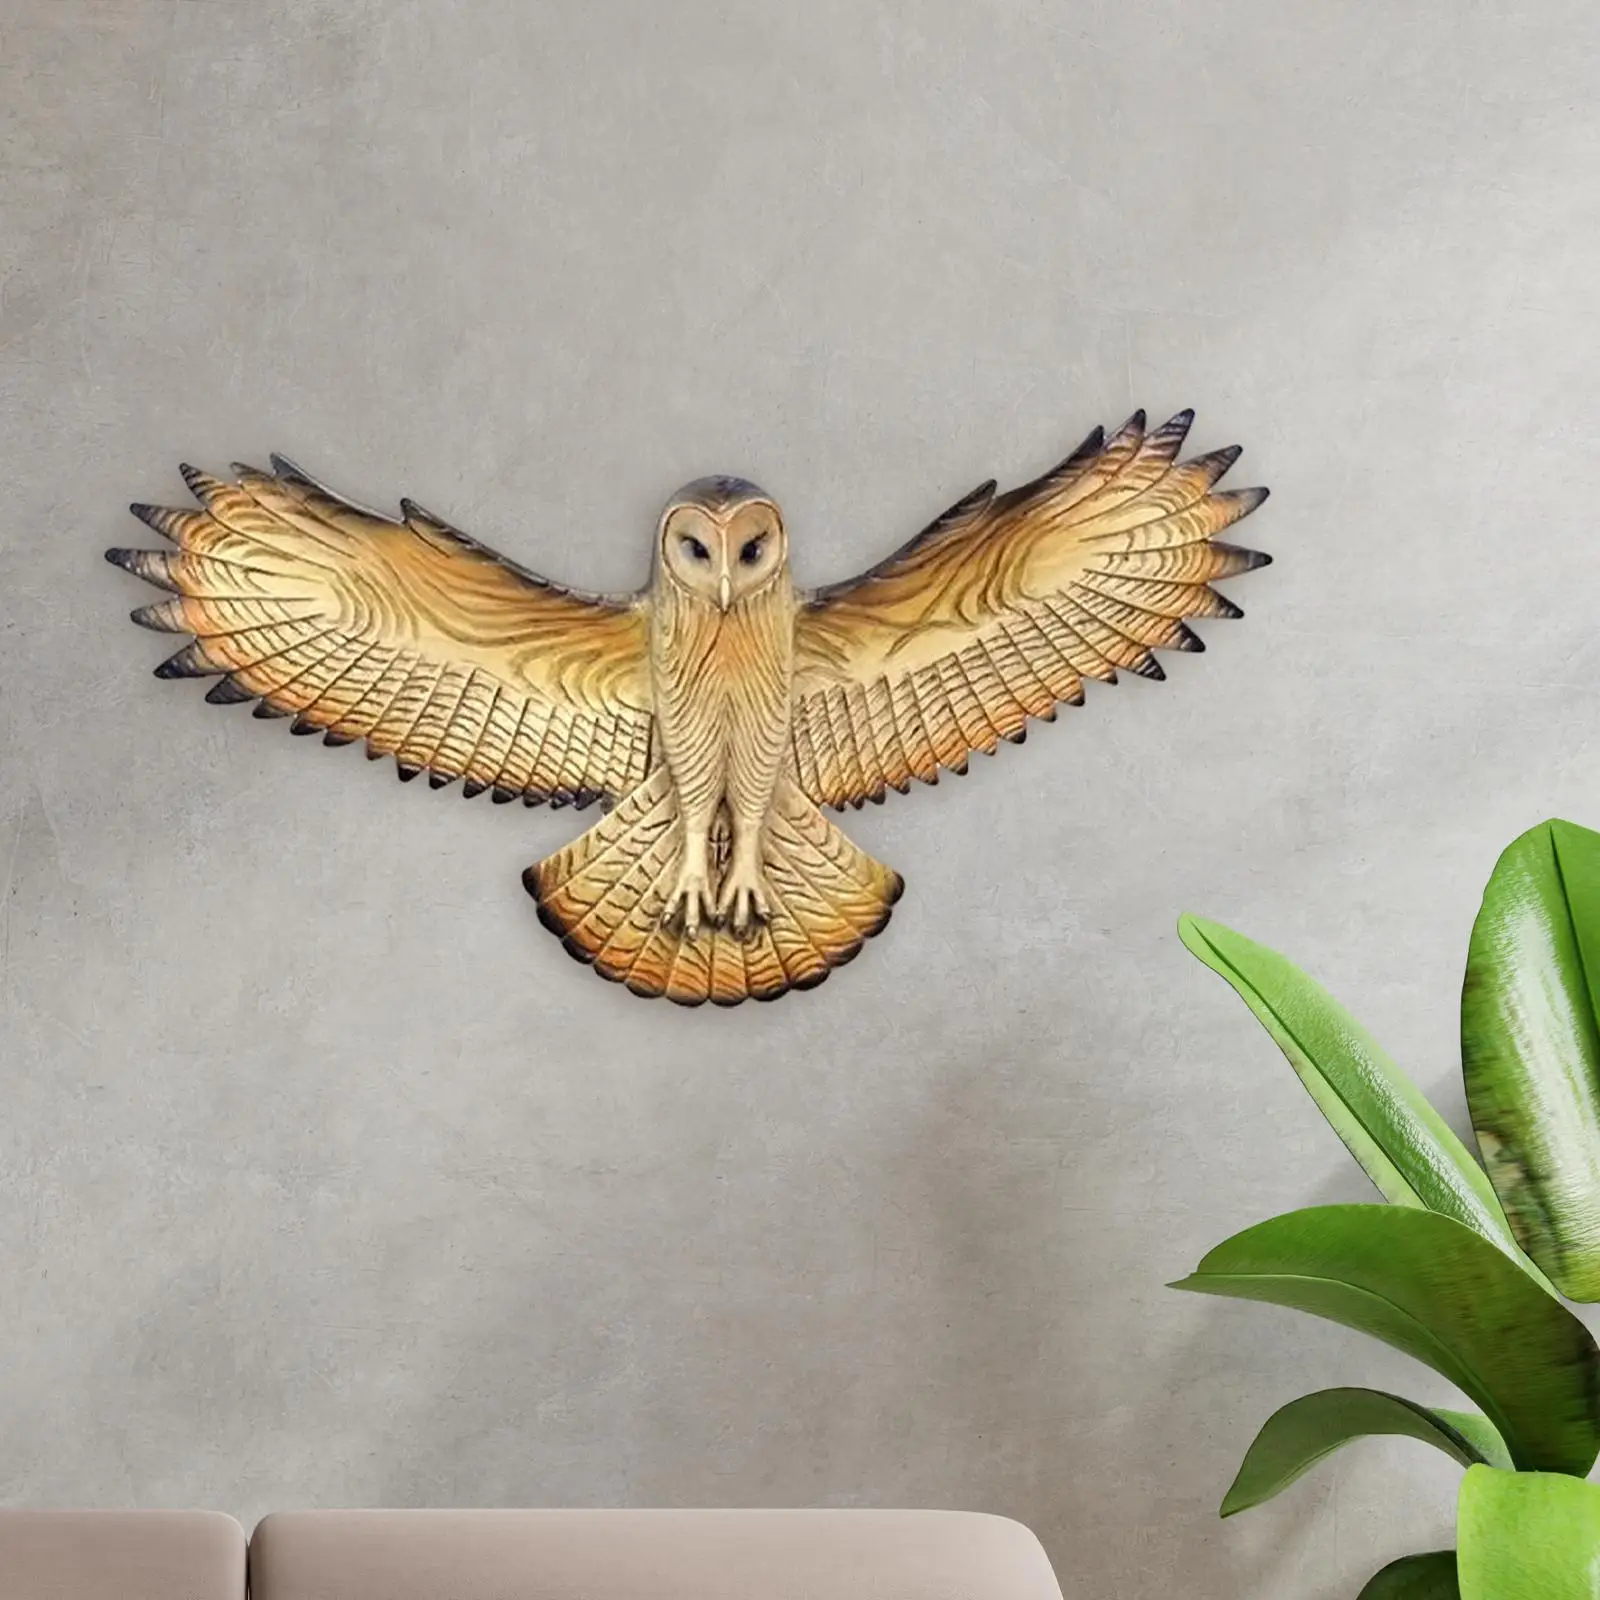 Owl Wall Decor Rustic Collectible Wall Hanging Sculpture Resin Statue for Hallway Living Room Bedroom Decor Housewarming Gift